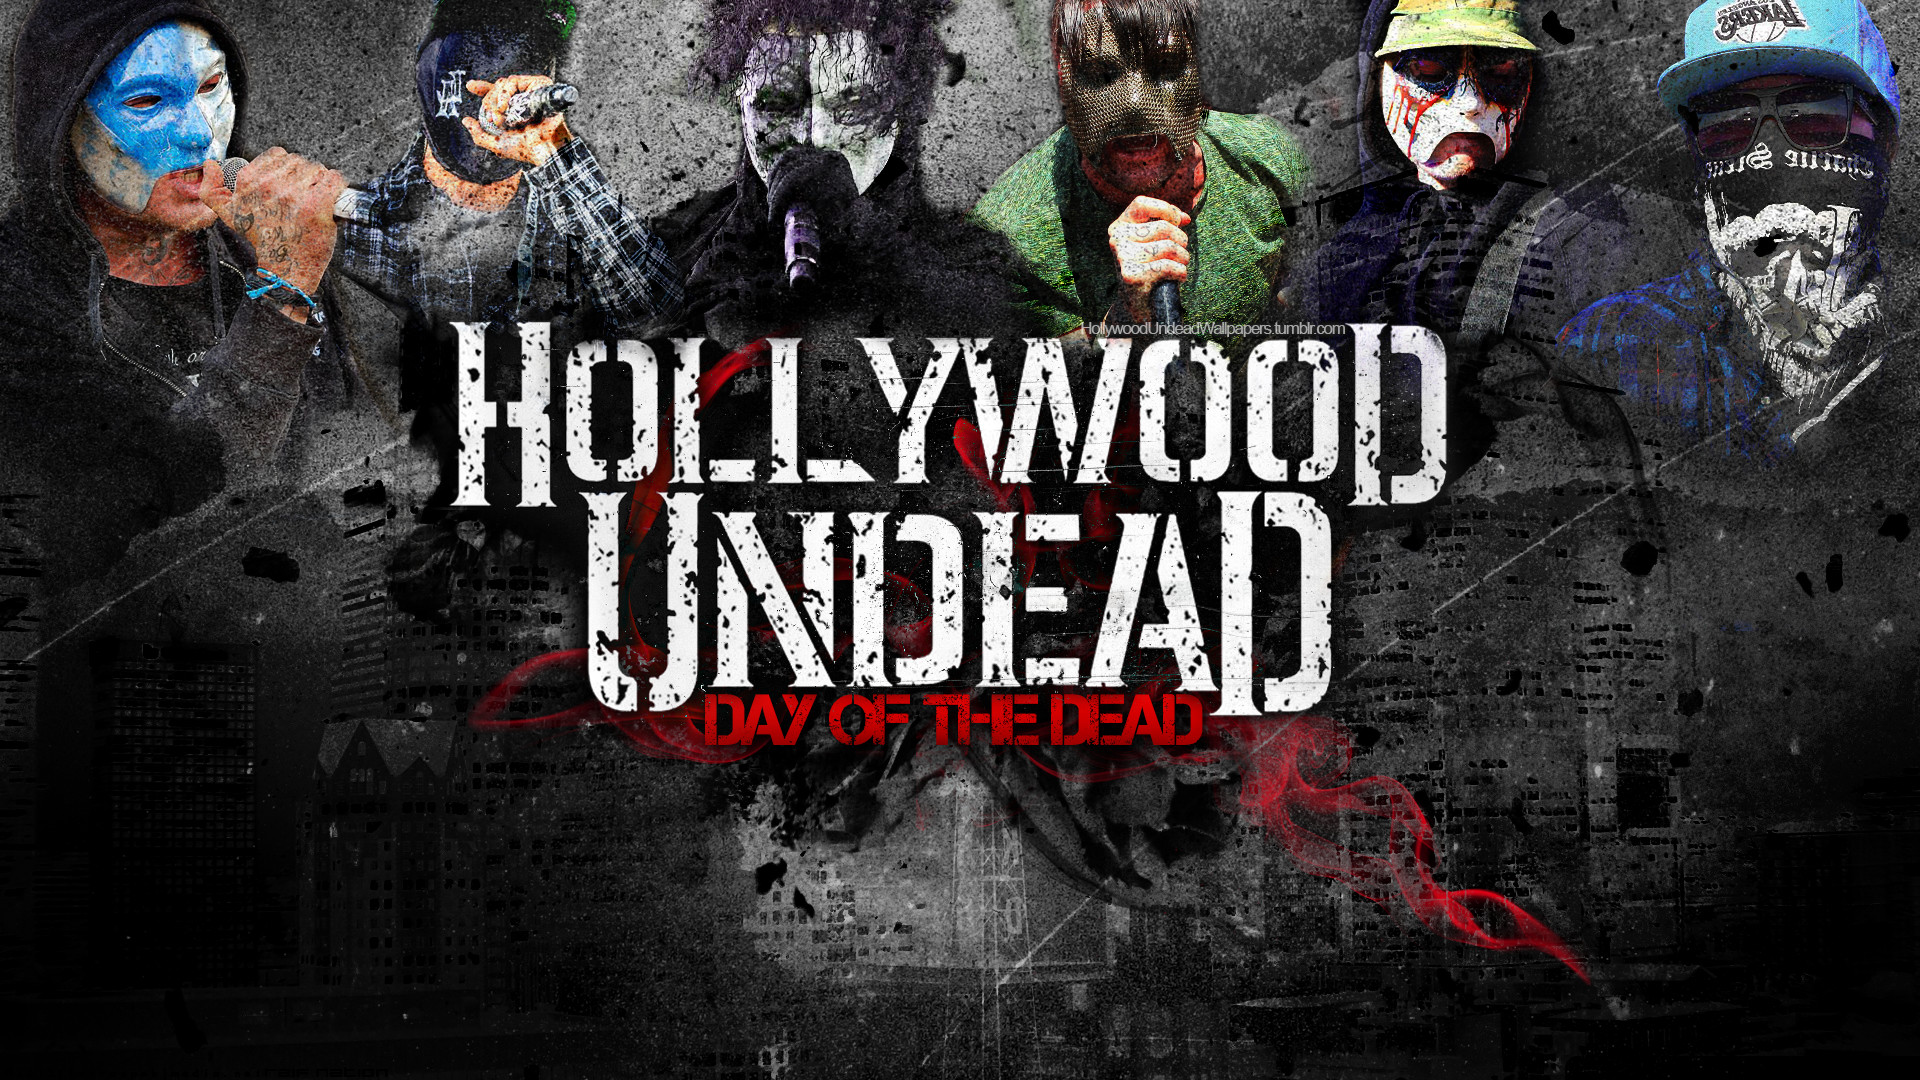 1920x1080 ... Hollywood Undead - Day of the Dead Wallpaper by emirulug